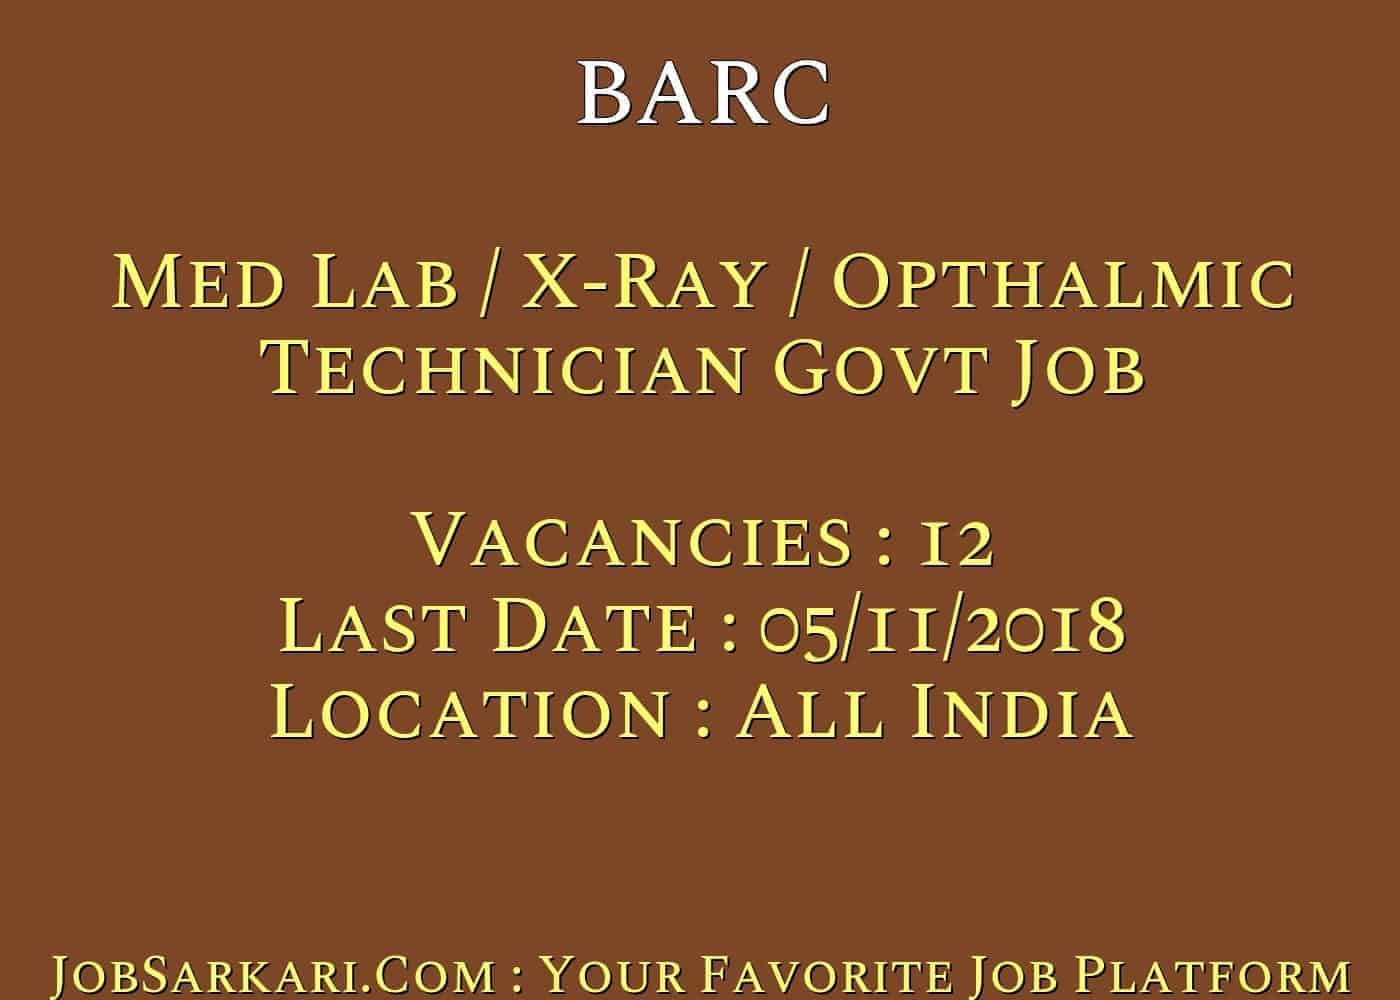 BARC Recruitment 2018 for Med Lab / X-Ray / Opthalmic Technician Govt Job